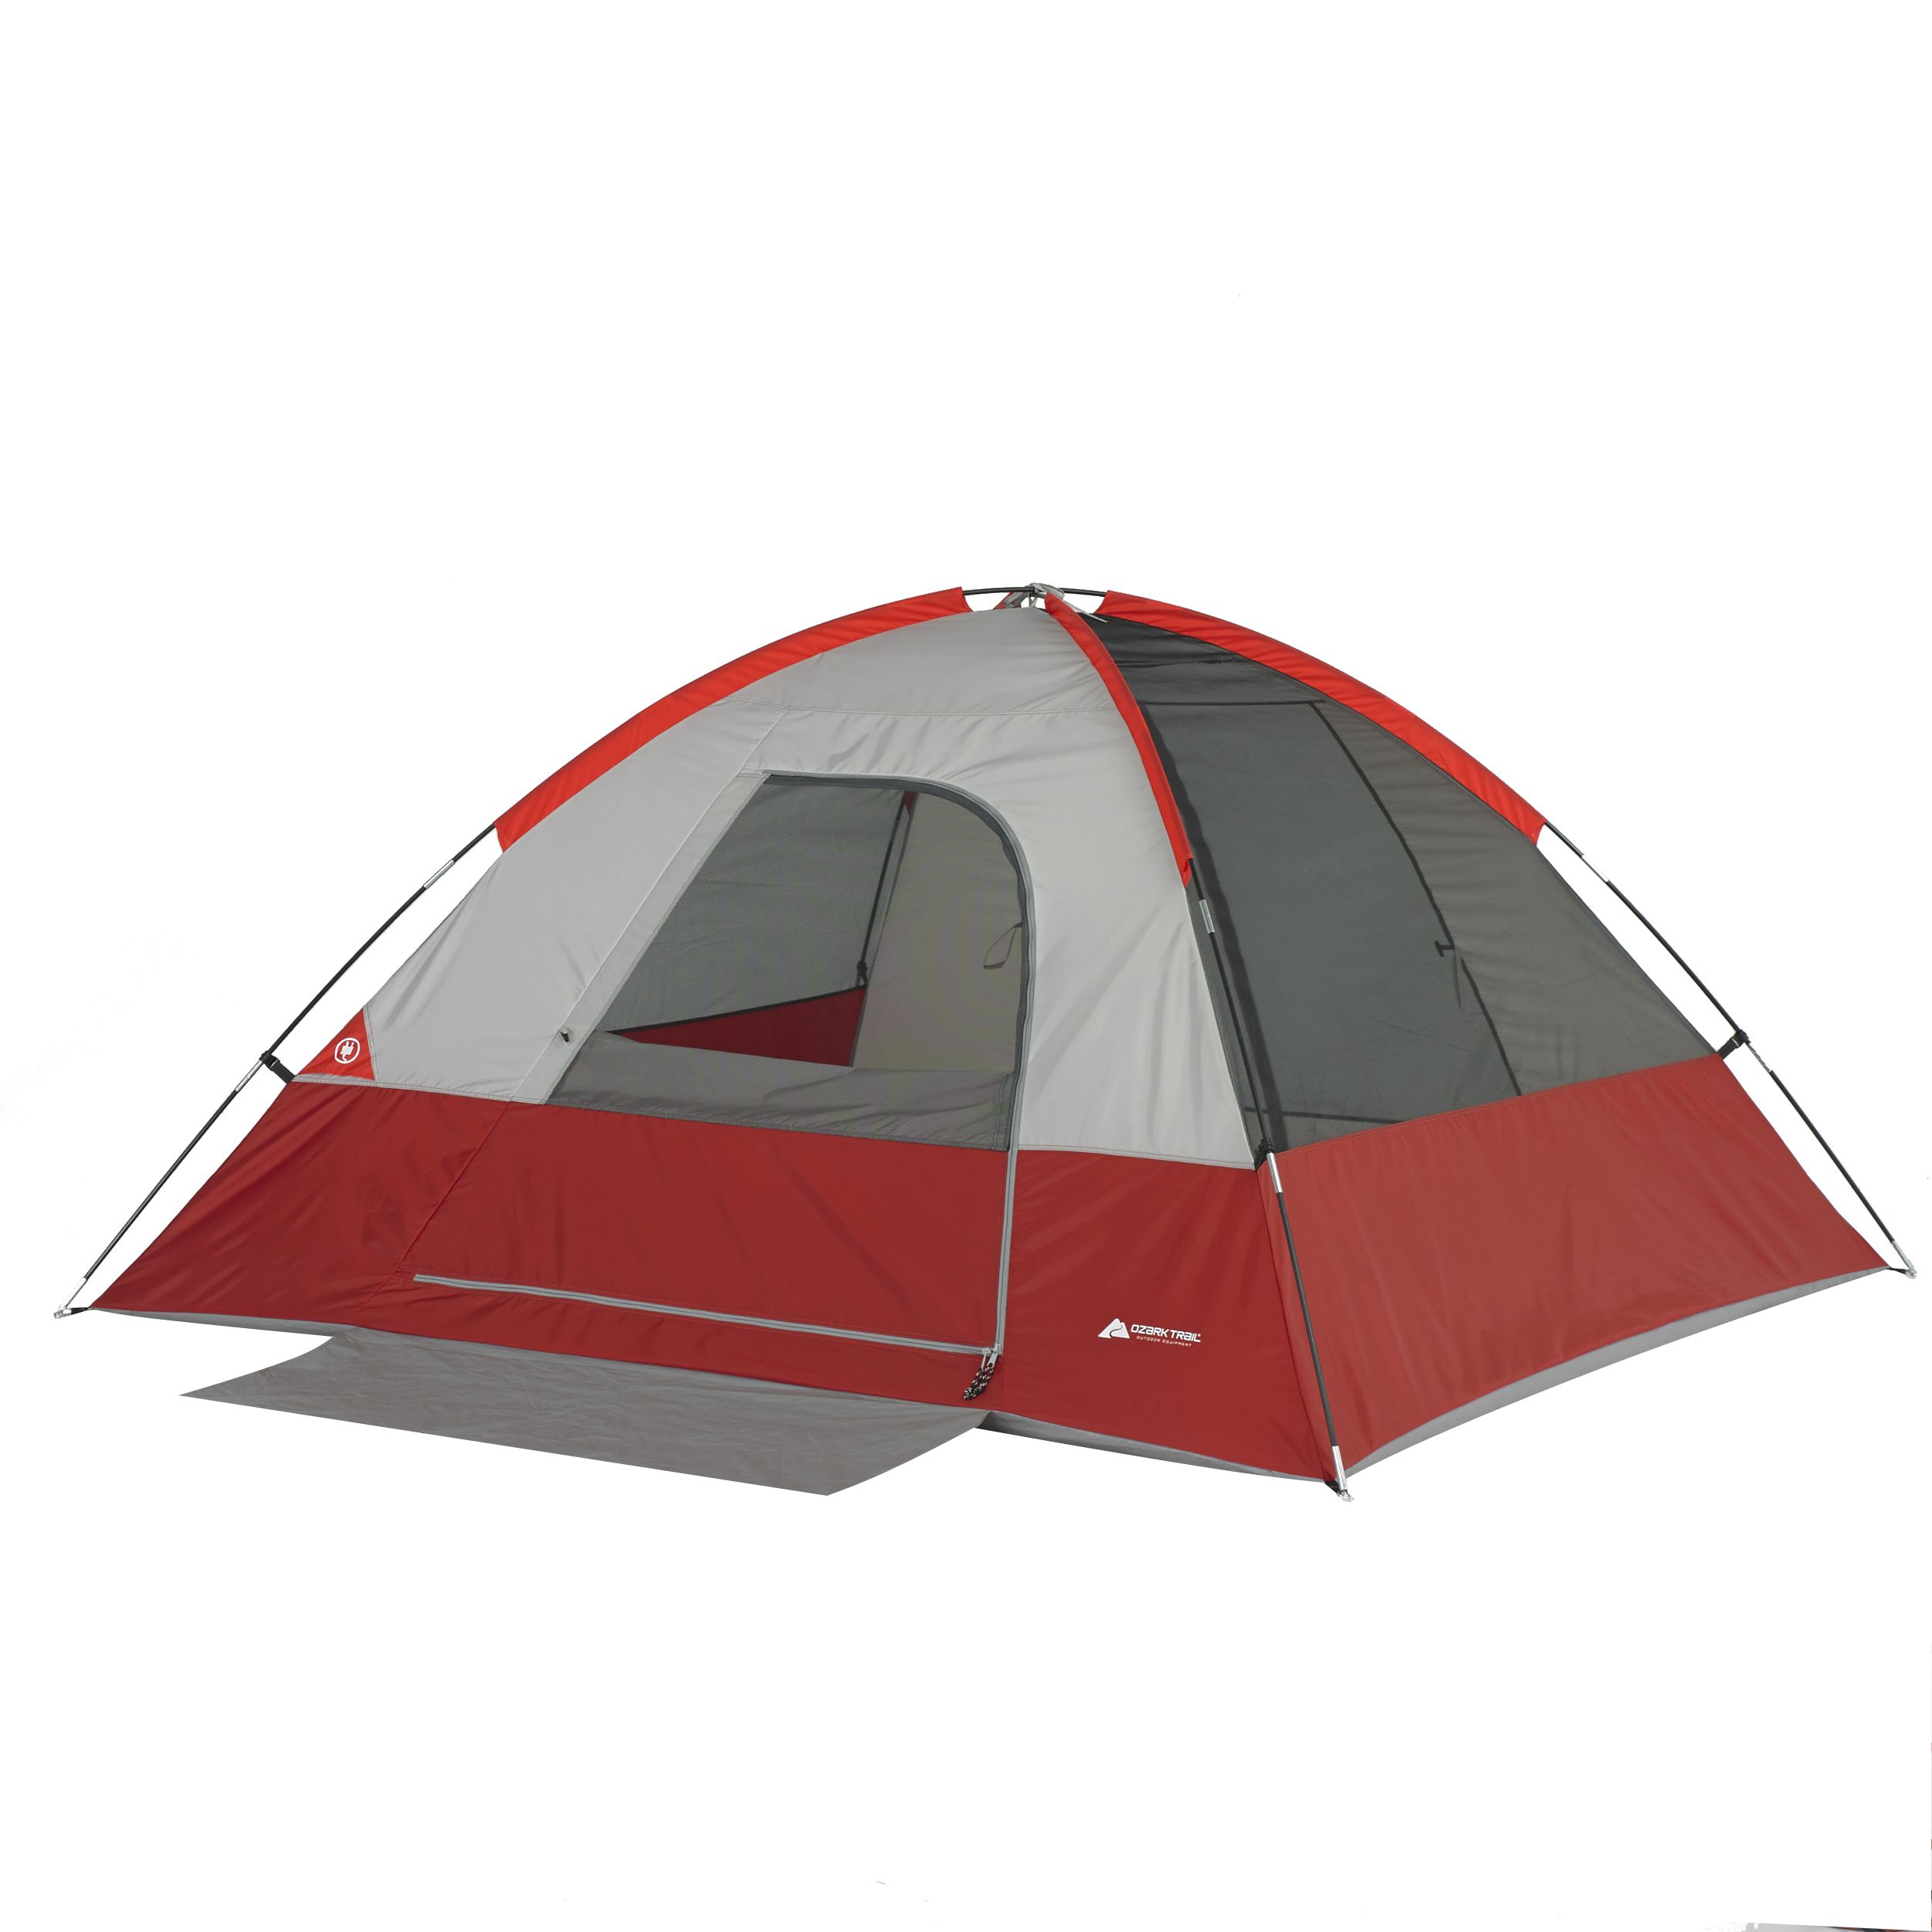 Ozark Trail 4-Person Dome Tent, with Vestibule and Full Coverage Fly - image 4 of 6